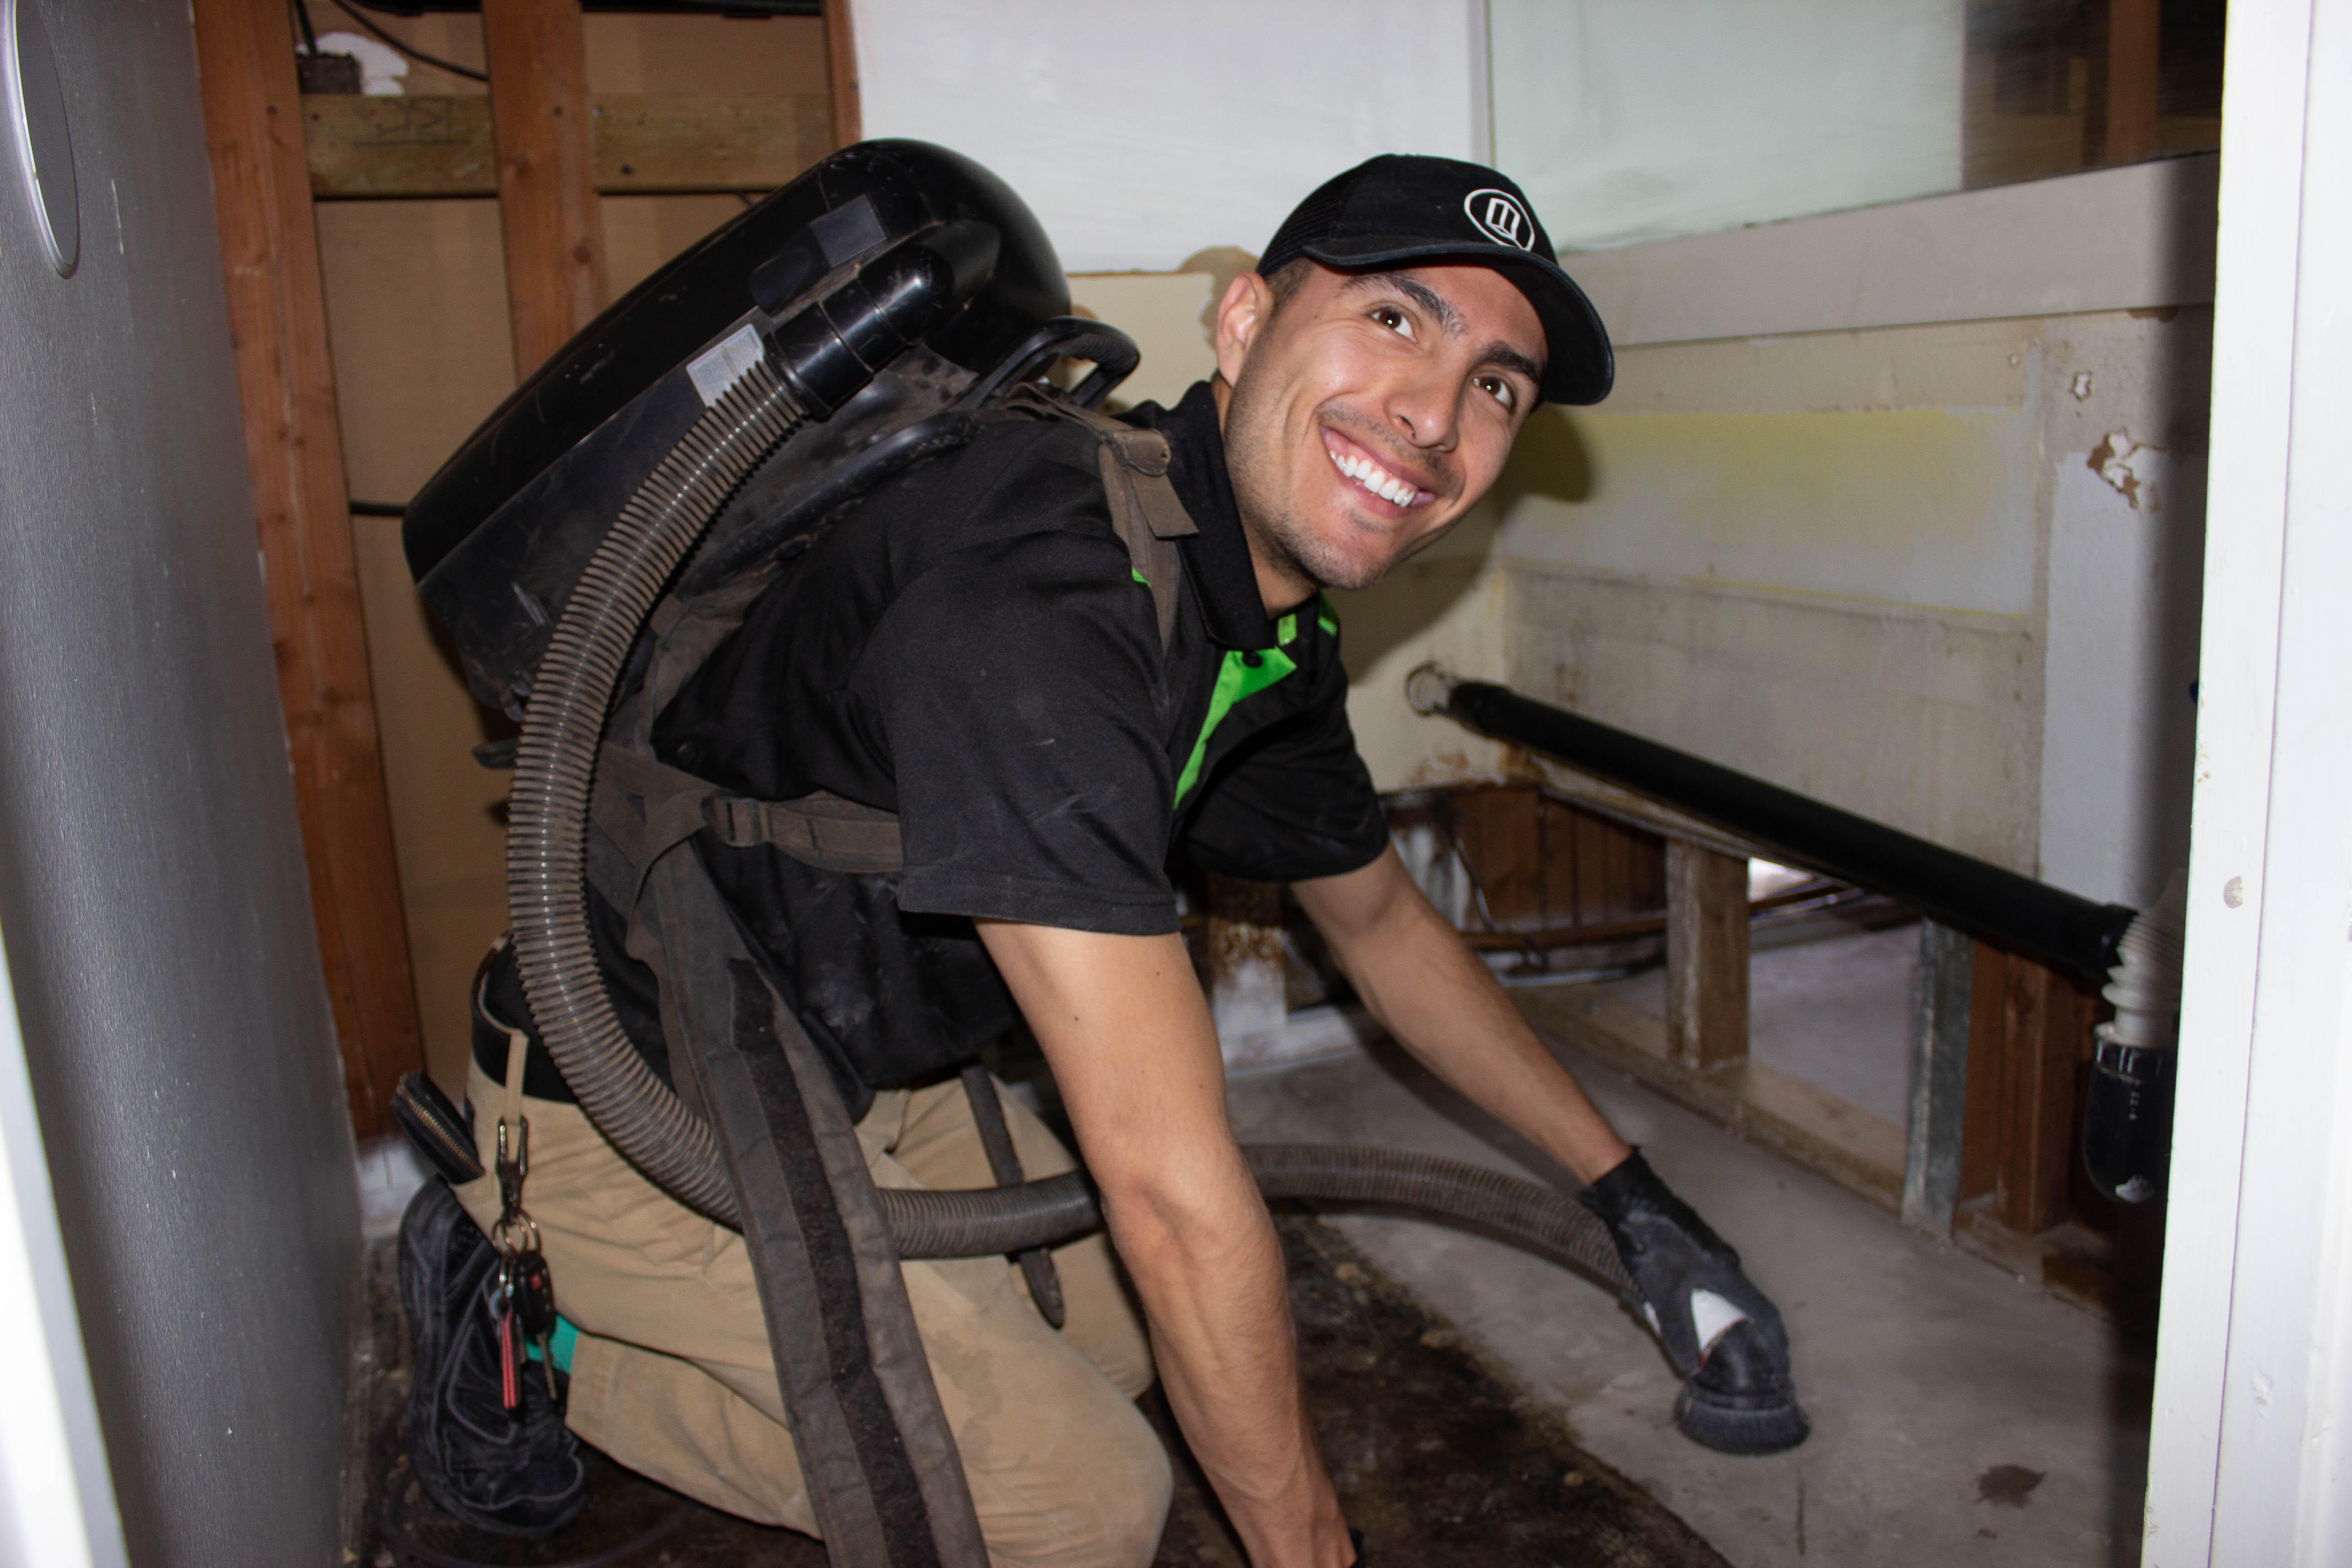 SERVPRO of San Diego East is fully equipped to handle all water, mold and fire damages. SERVPRO is the best team for the job. We are a call away!